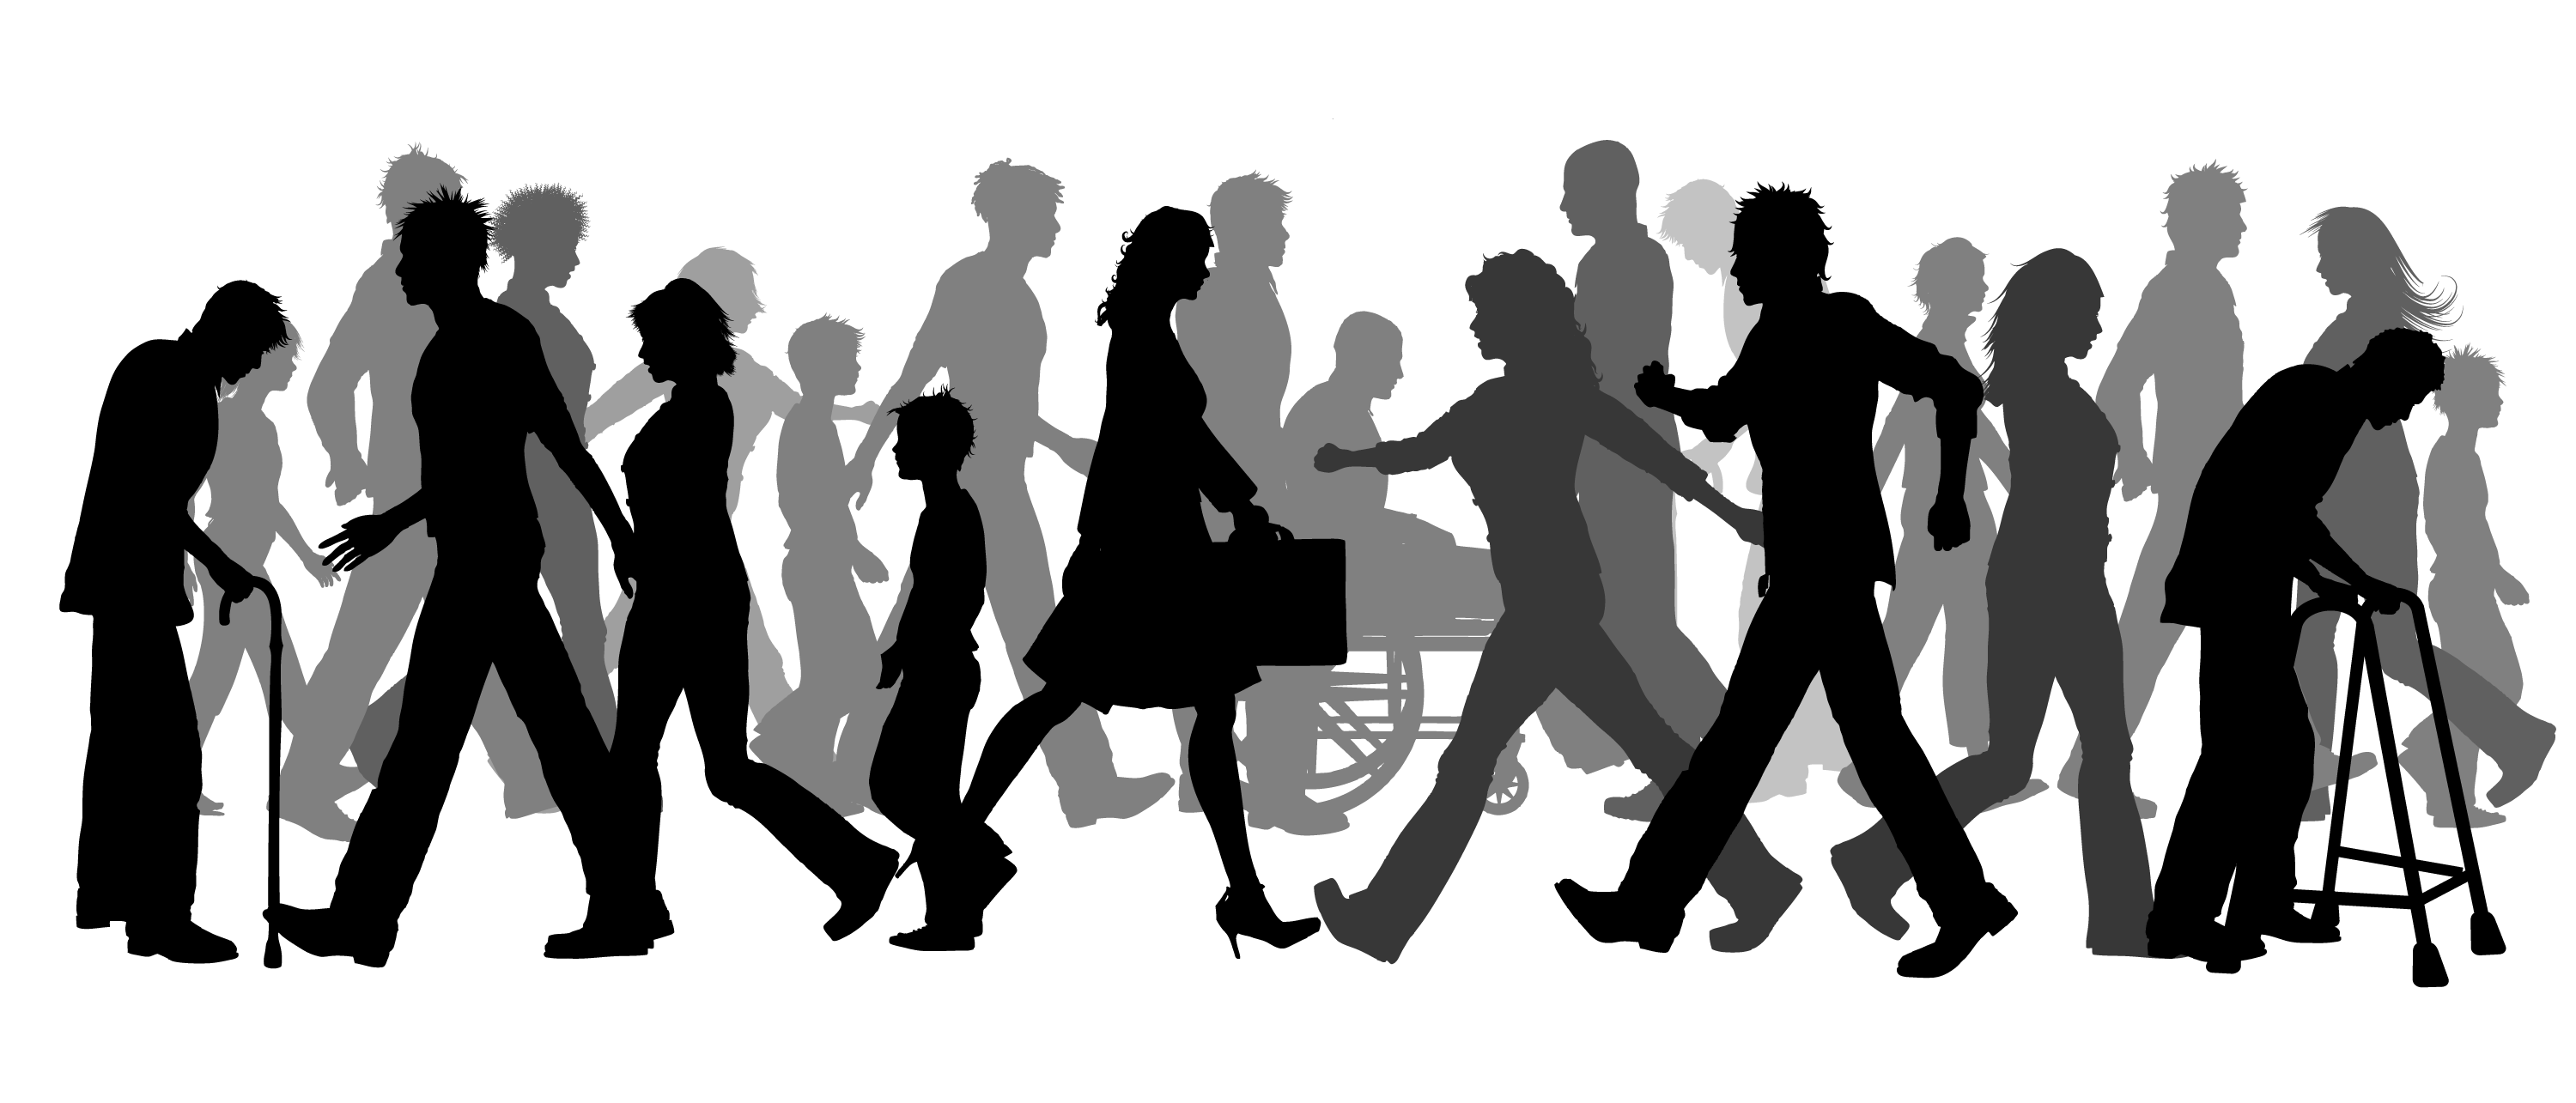 Walking Clip art - group of people png download - 3000*1285 - Free ...